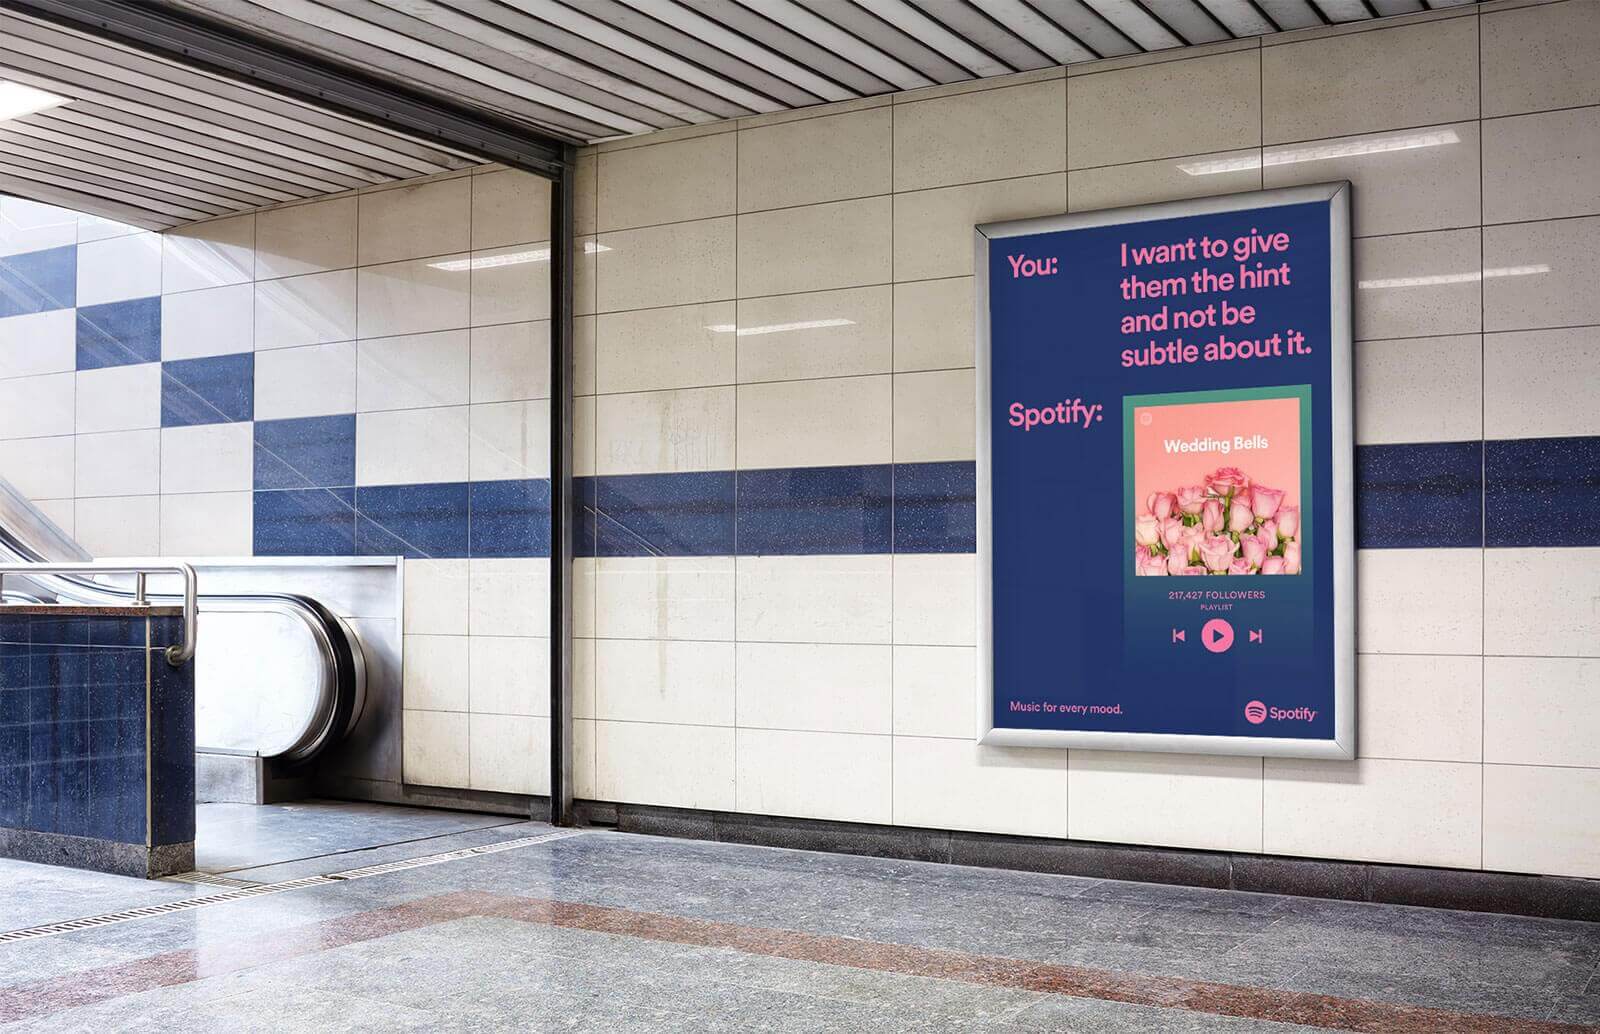 Spotify users can relate to this subway OOH ad